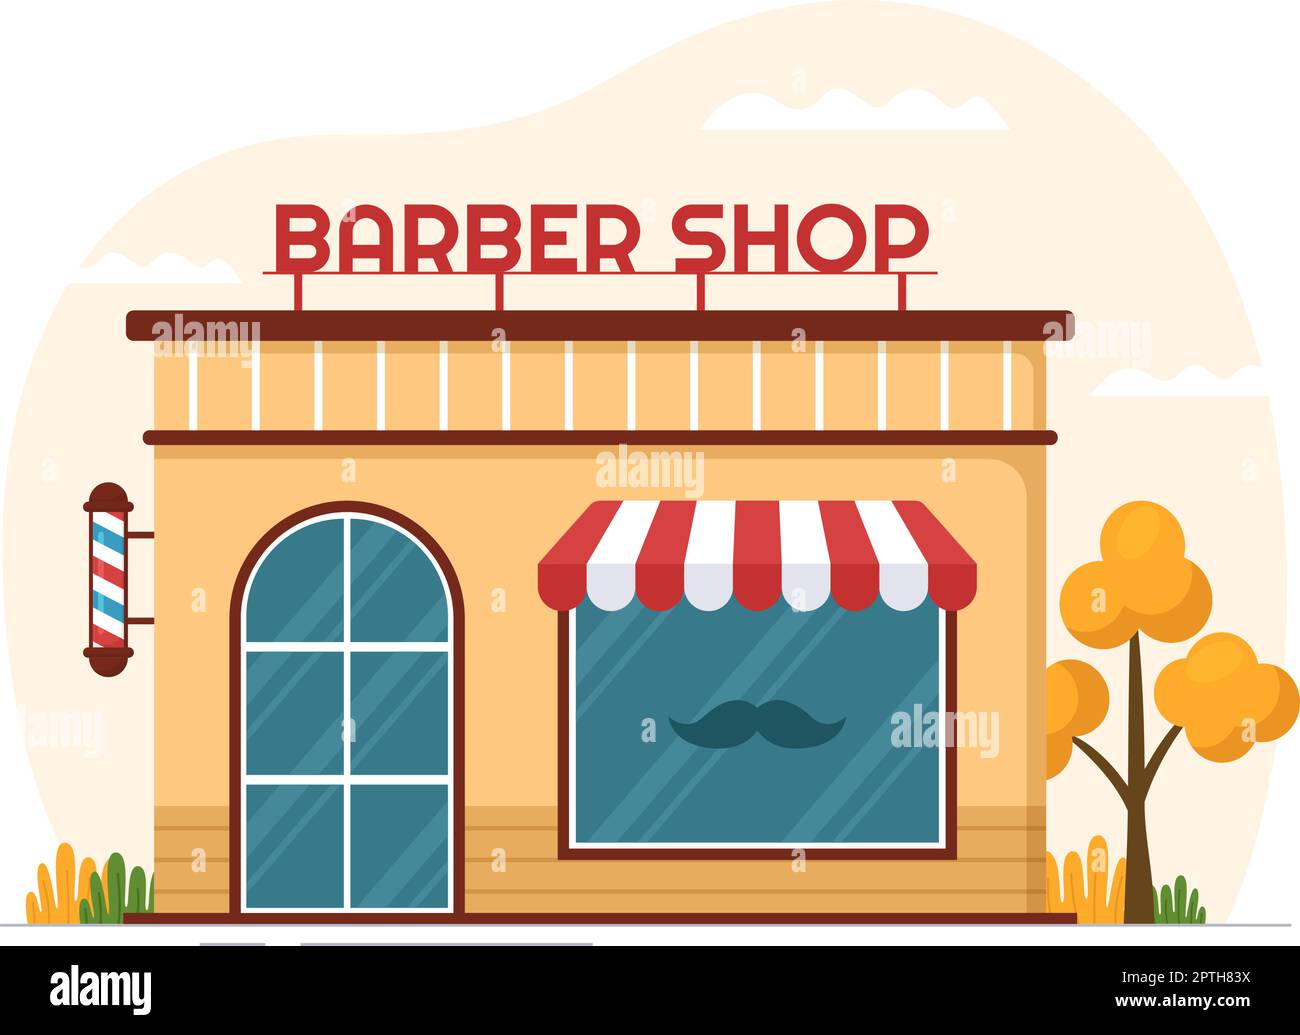 Barber Shop for Male or Female Clients Haircut with Mirrors, Desk and Hair Cutting Equipment in Flat Cartoon Hand Drawn Templates Illustration Stock Vector